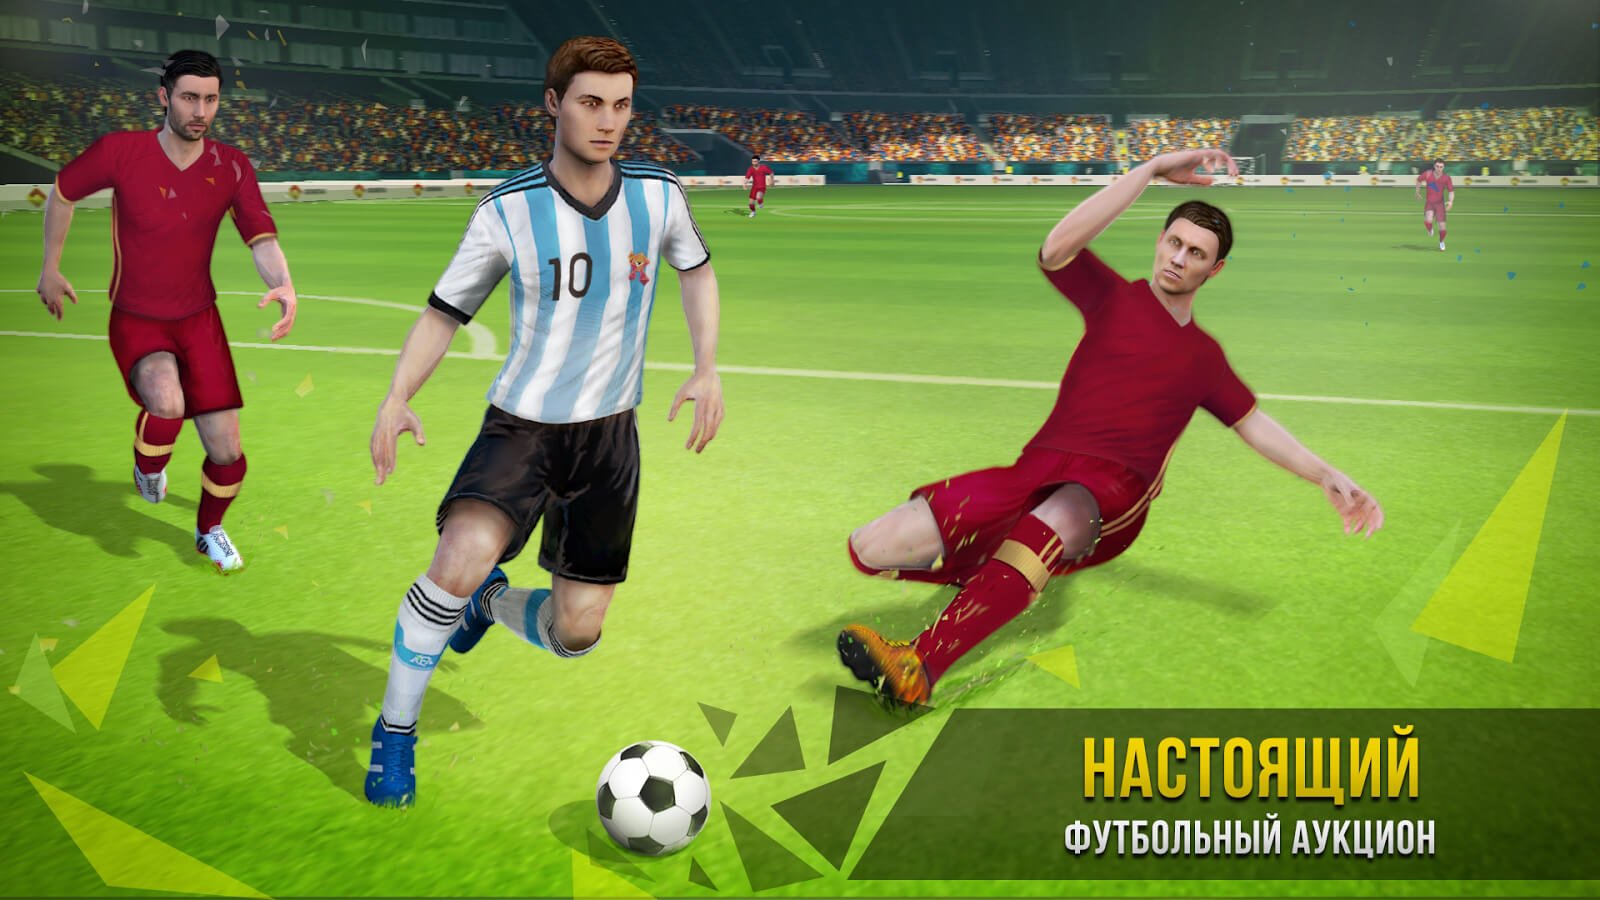 New Star Soccer 4.16.5 APK for Android - Download - AndroidAPKsFree